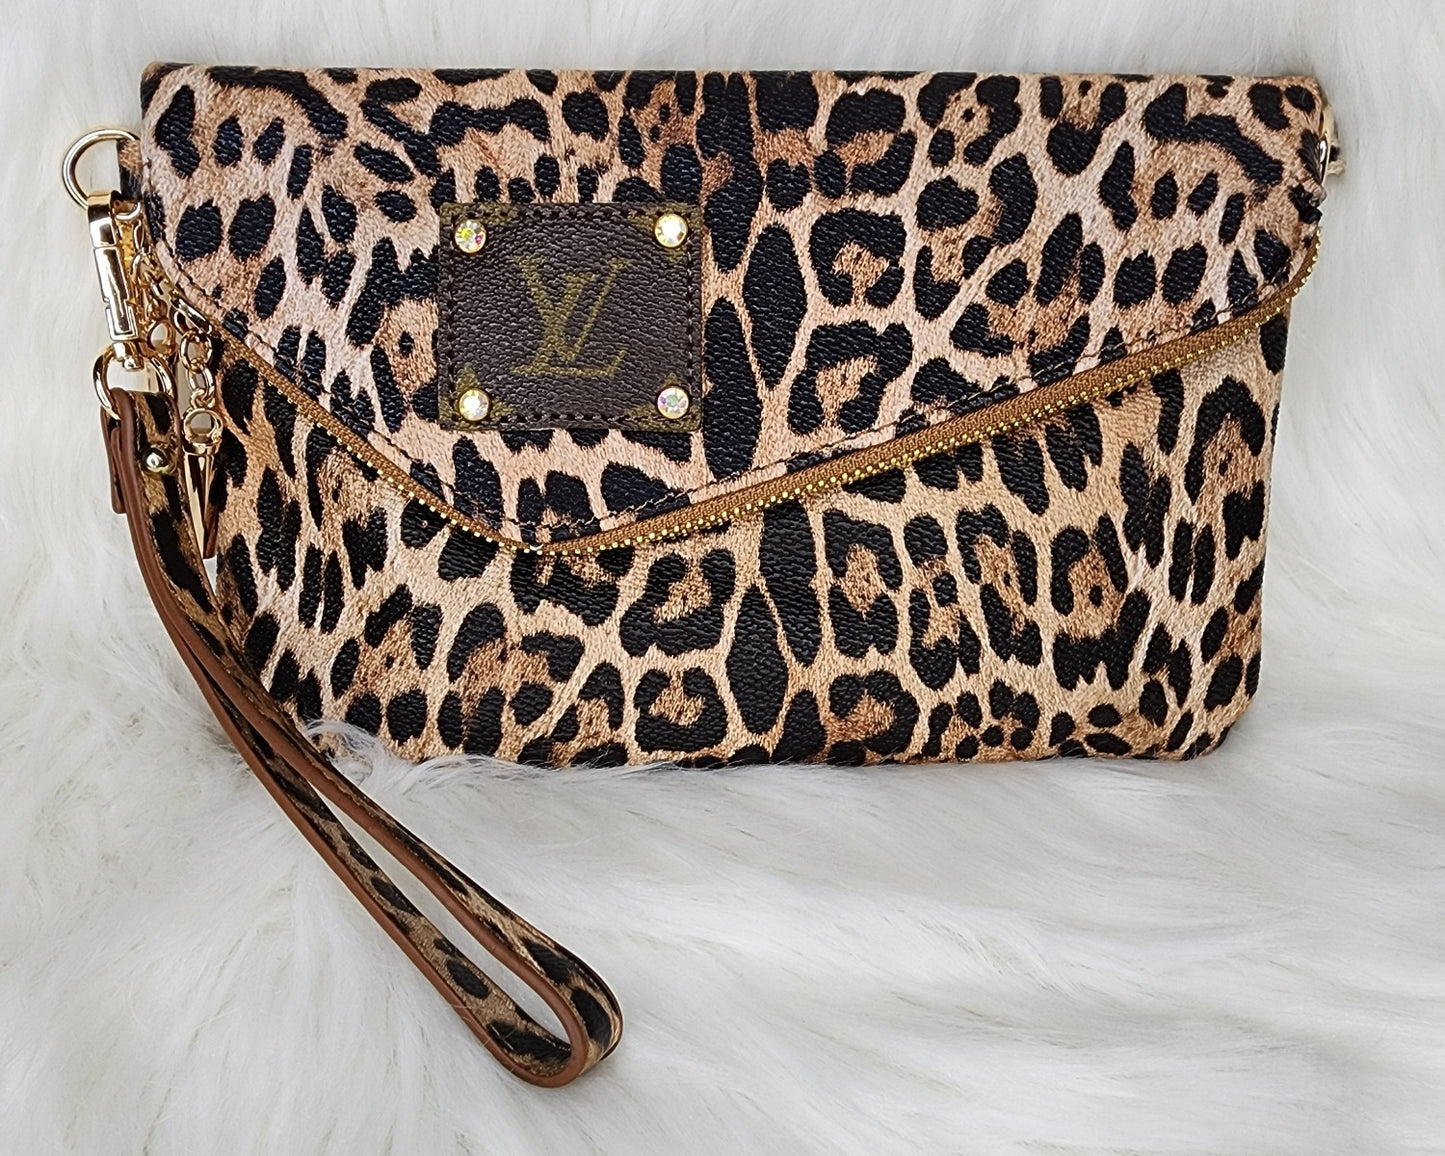 The Vintage Leopard - Restocked 💕💕💕 100% Upcycled LV Leather & Leopard  Stadium NFR Gameday Crossbody Bag {{$119.99}} To Order >>--> Comment With  Email or Order Online @